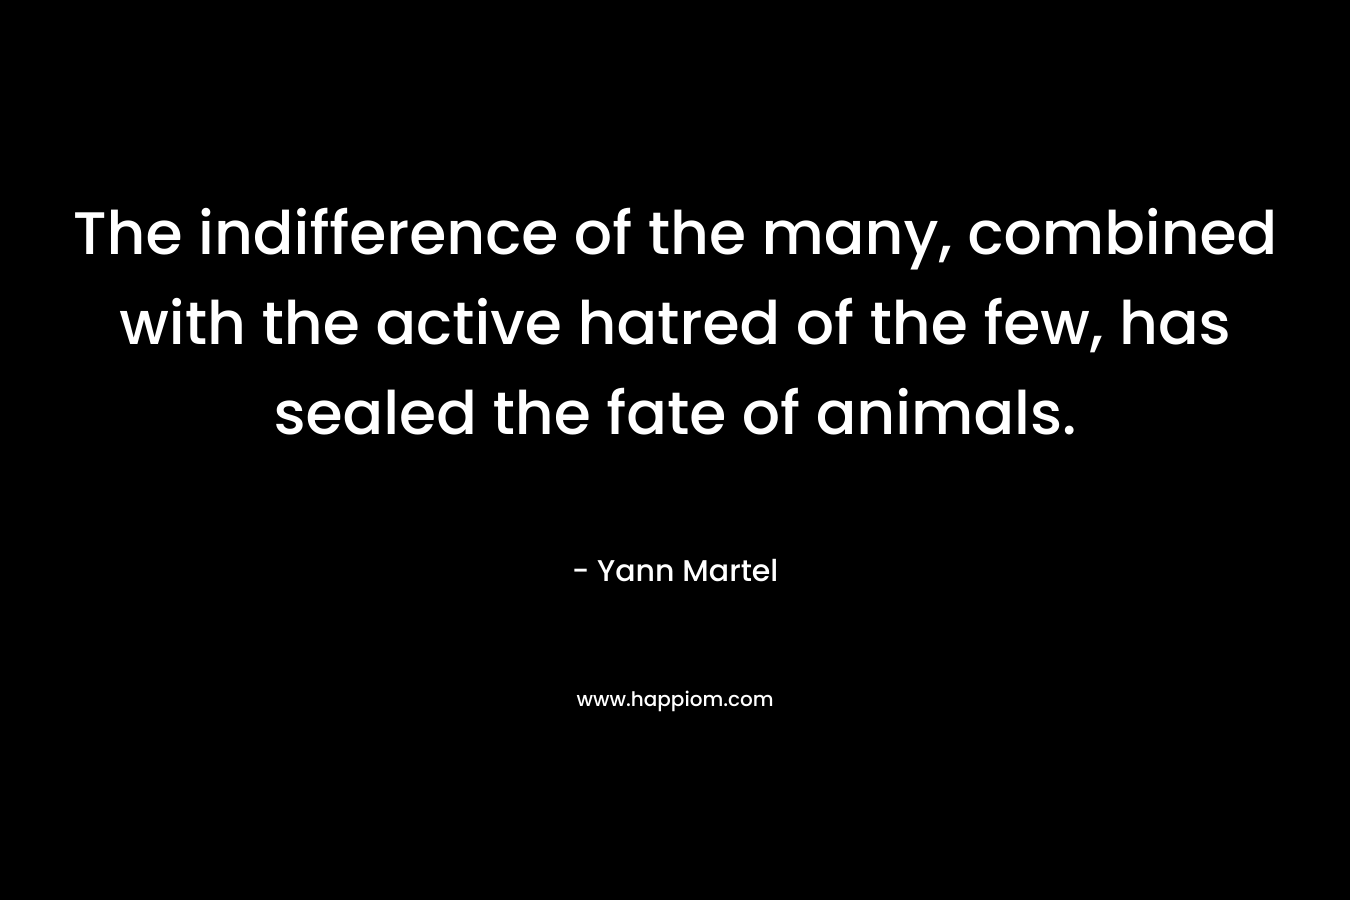 The indifference of the many, combined with the active hatred of the few, has sealed the fate of animals. – Yann Martel